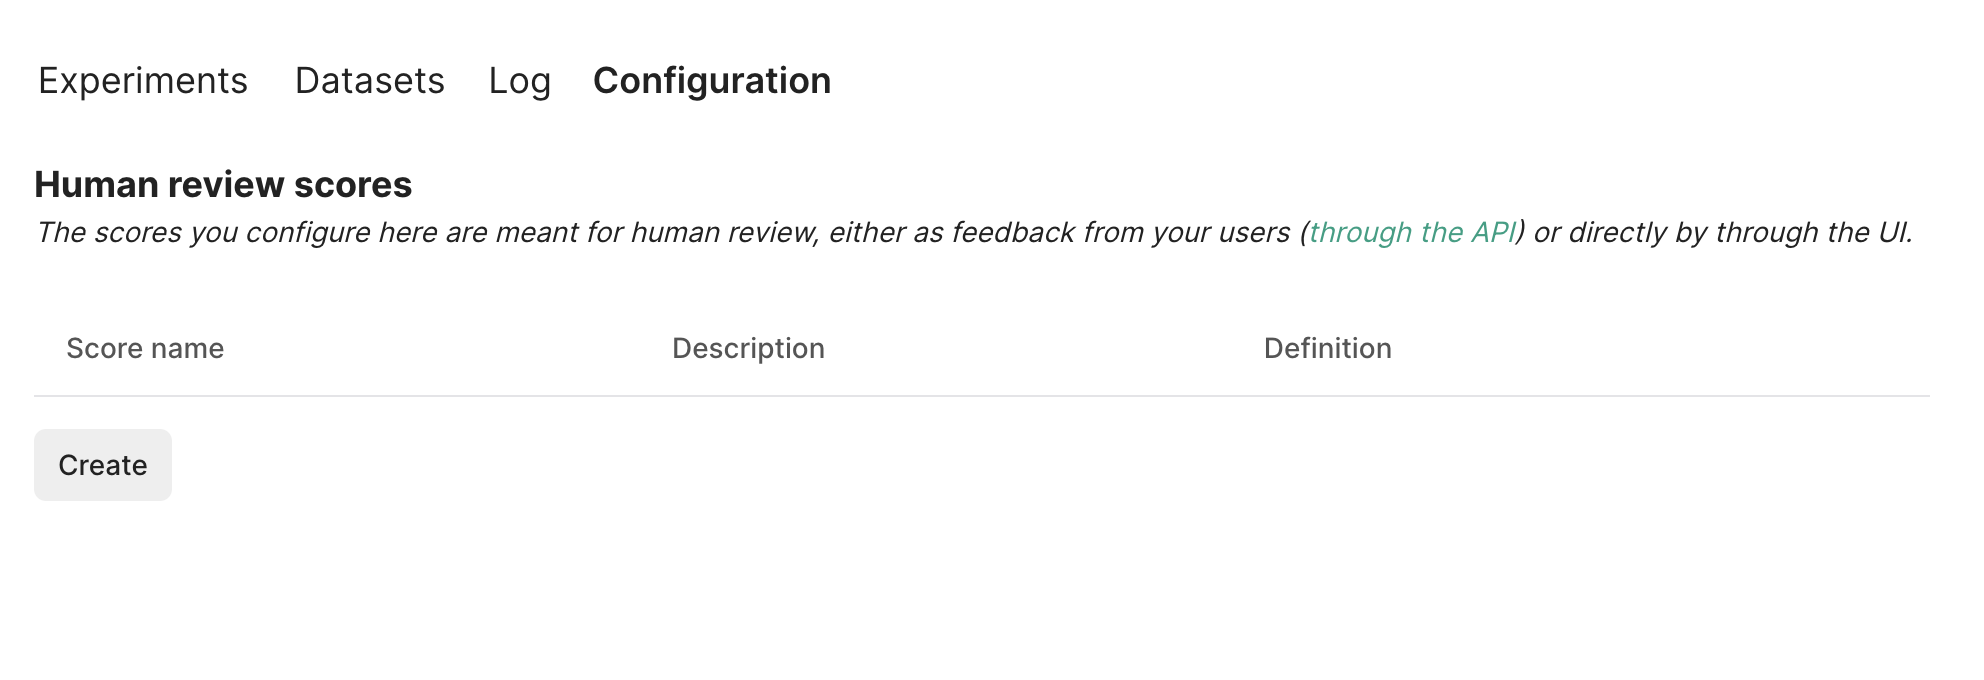 Human Review Configuration